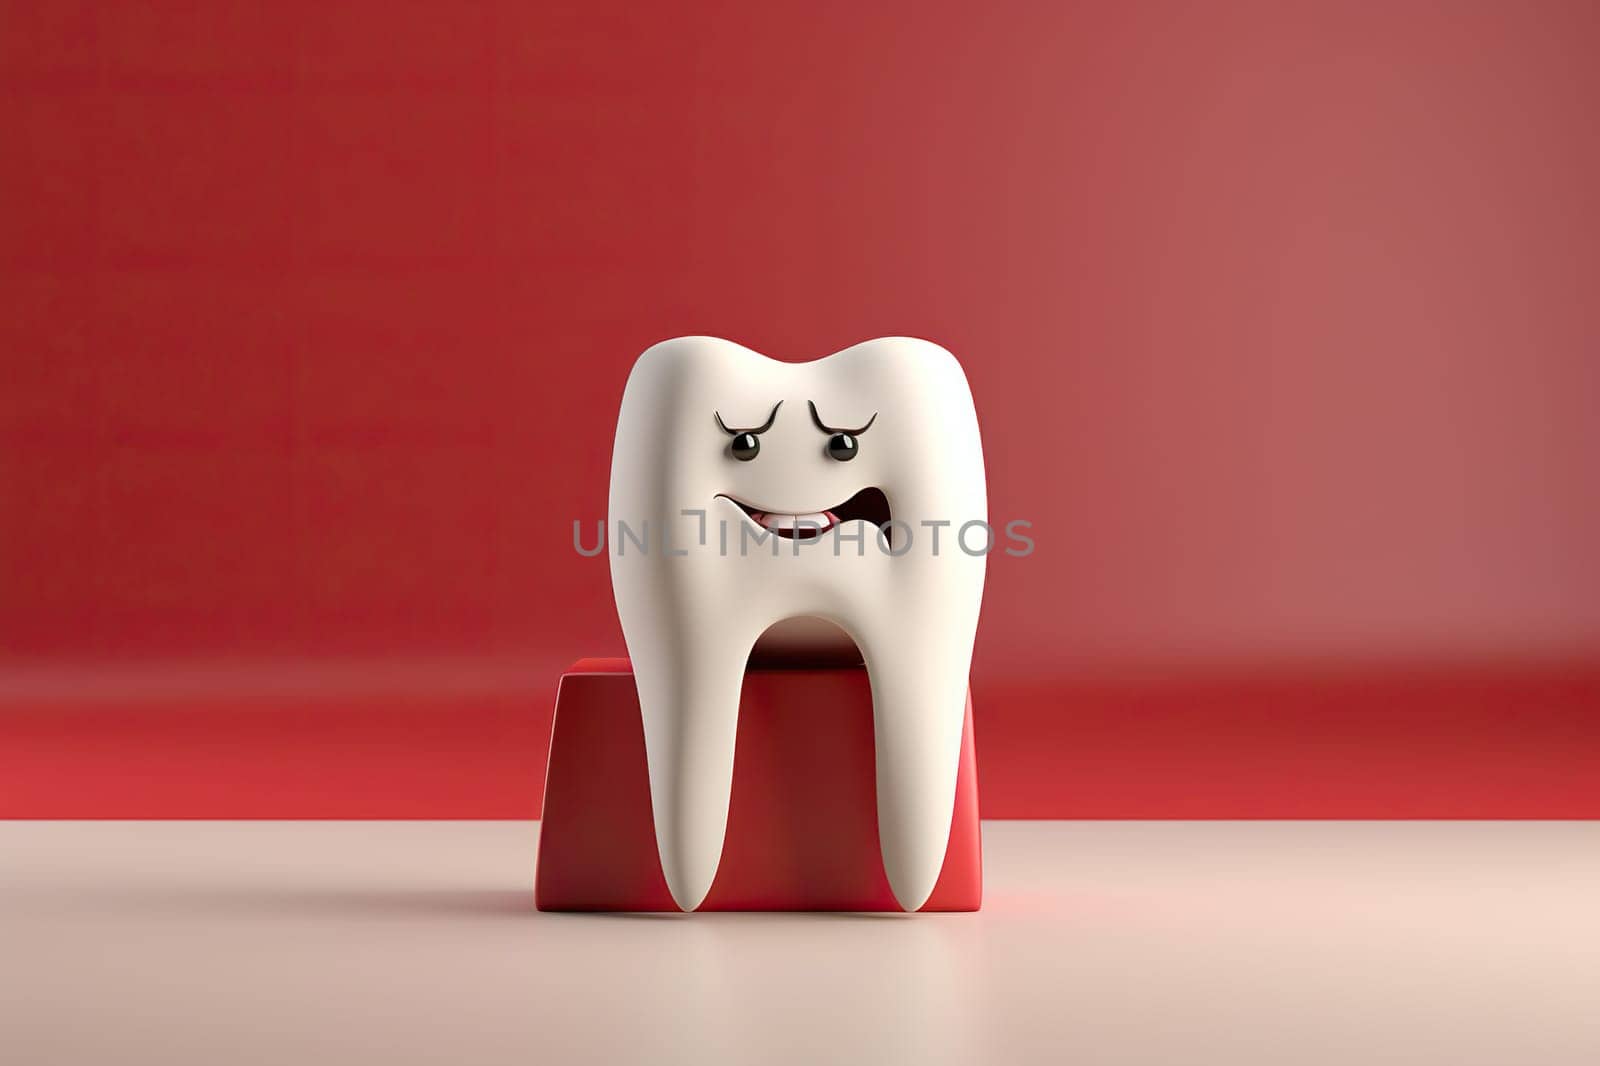 3D model of a tooth with a face sitting on the gum. Cartoon illustration. Generated by artificial intelligence by Vovmar